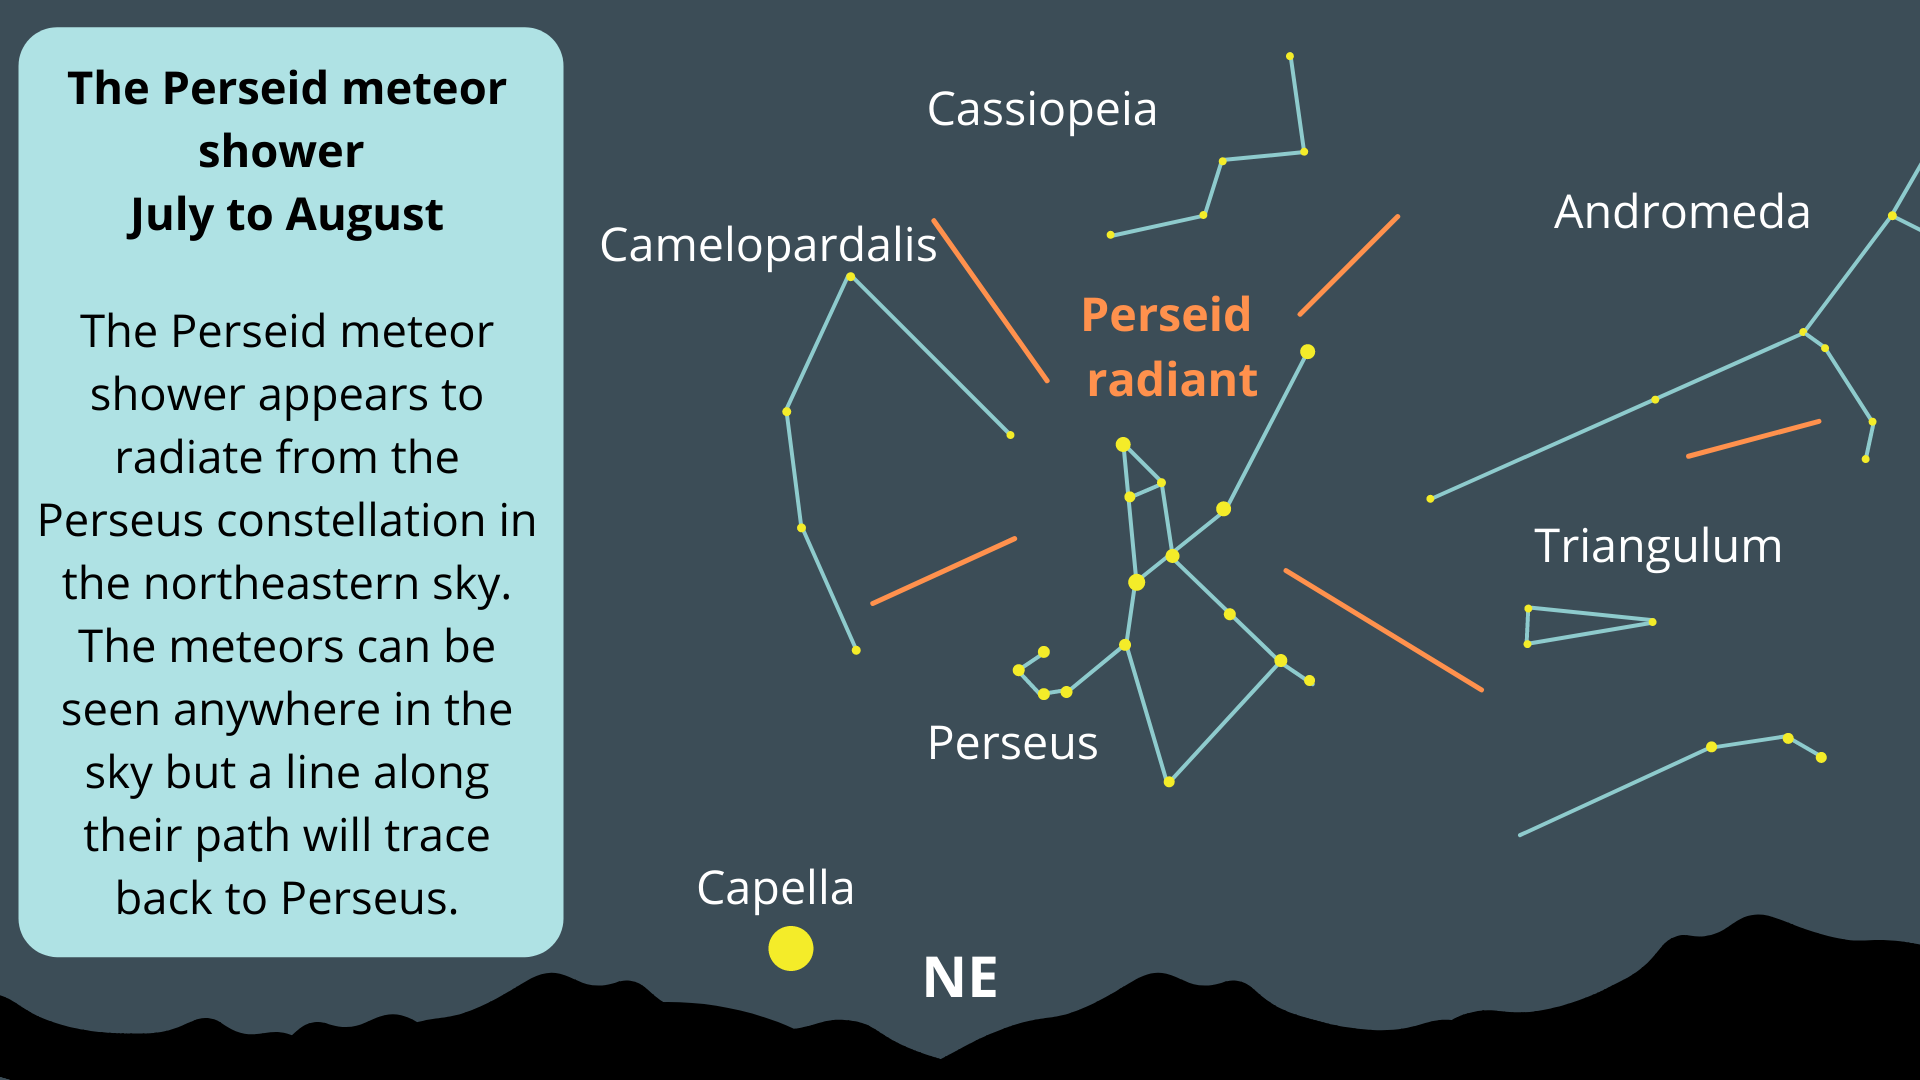 Diagram showing the perseid radiant located below Cassiopeia constellation. The meteors will appear to radiate from the Perseus constellation.